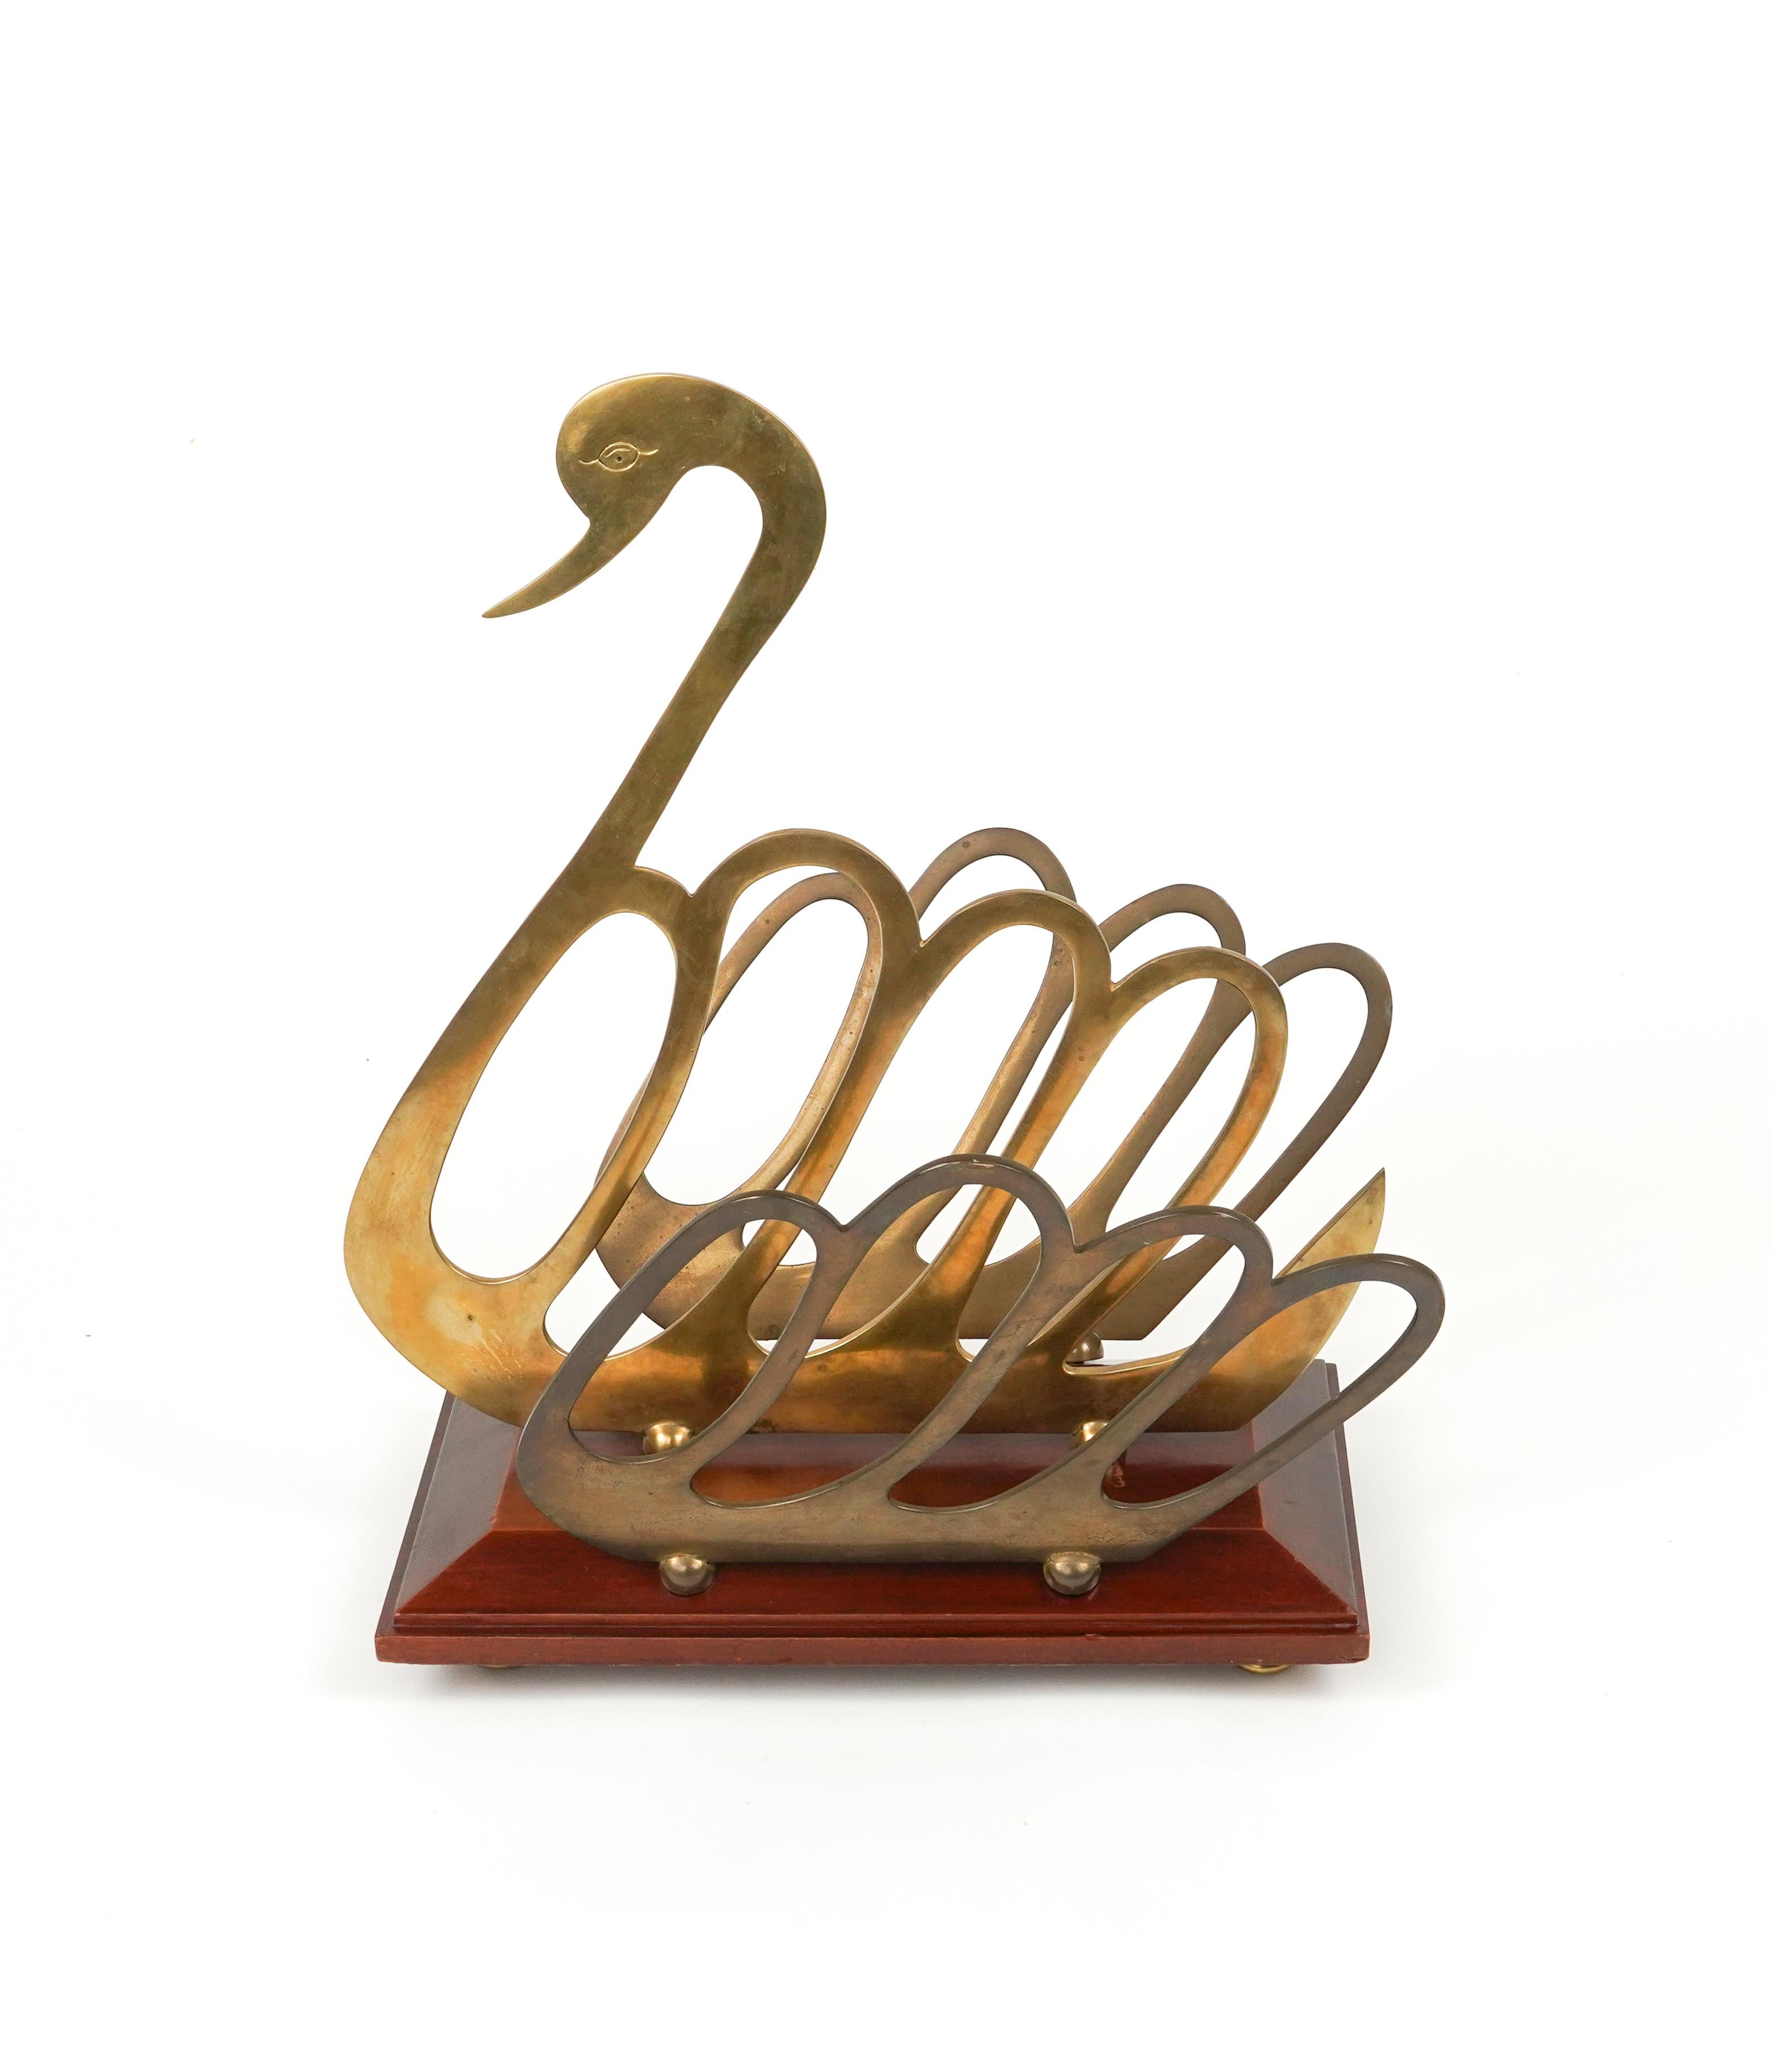 Midcentury beautiful swan figure magazine rack in wood and brass in the style of Maison Jansen.

Made in Italy in the 1970s.